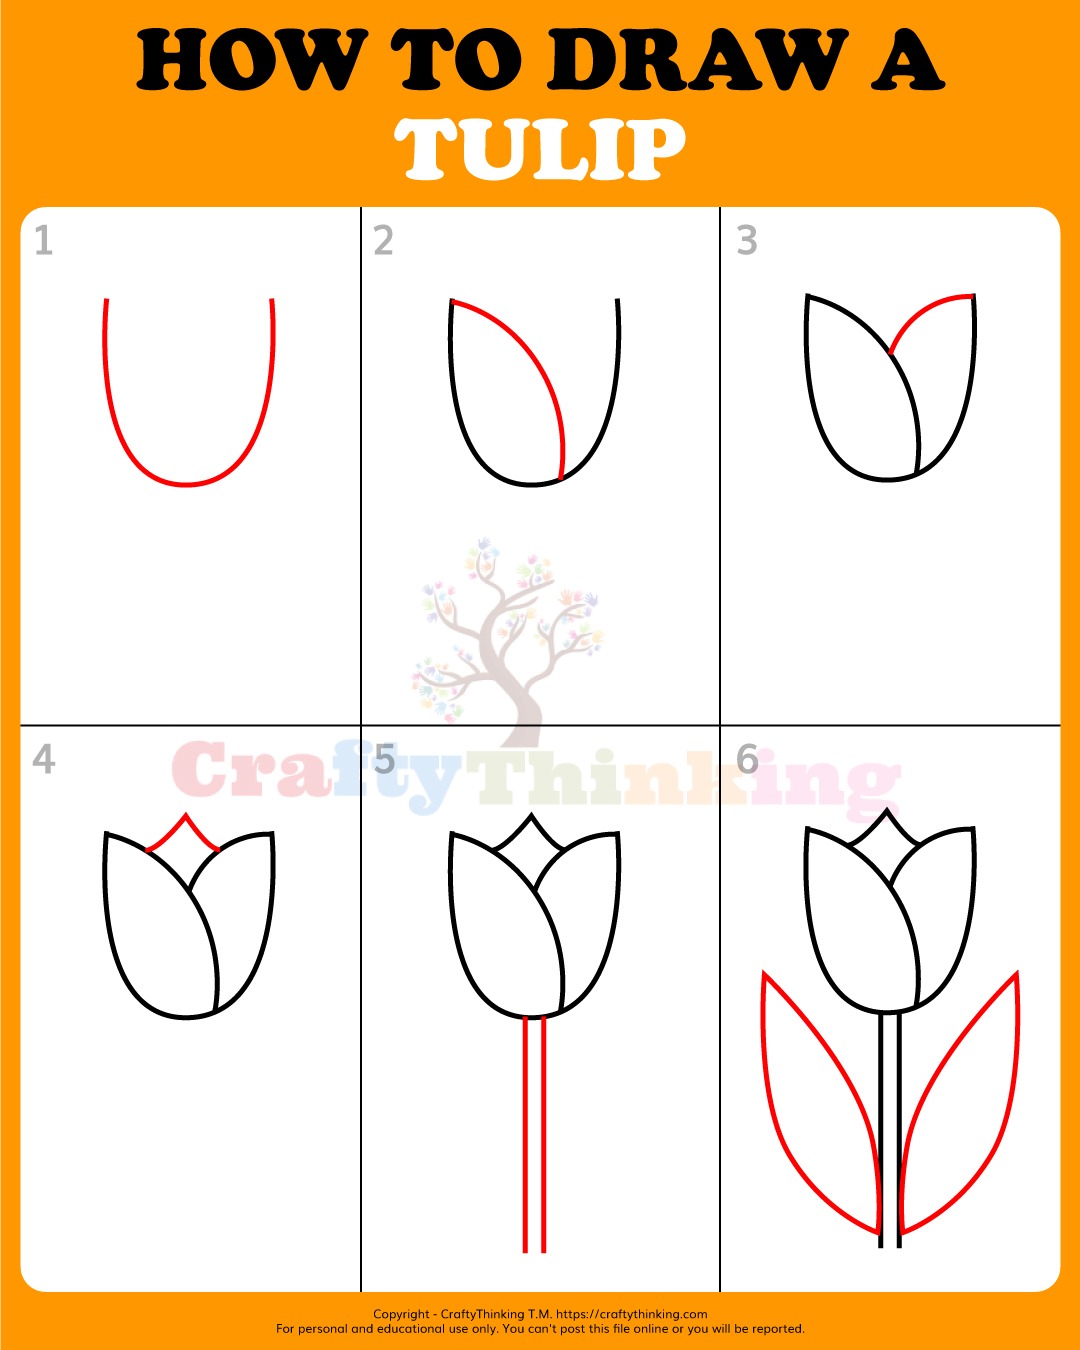 How To Draw A Tulip Step By Step For Kids